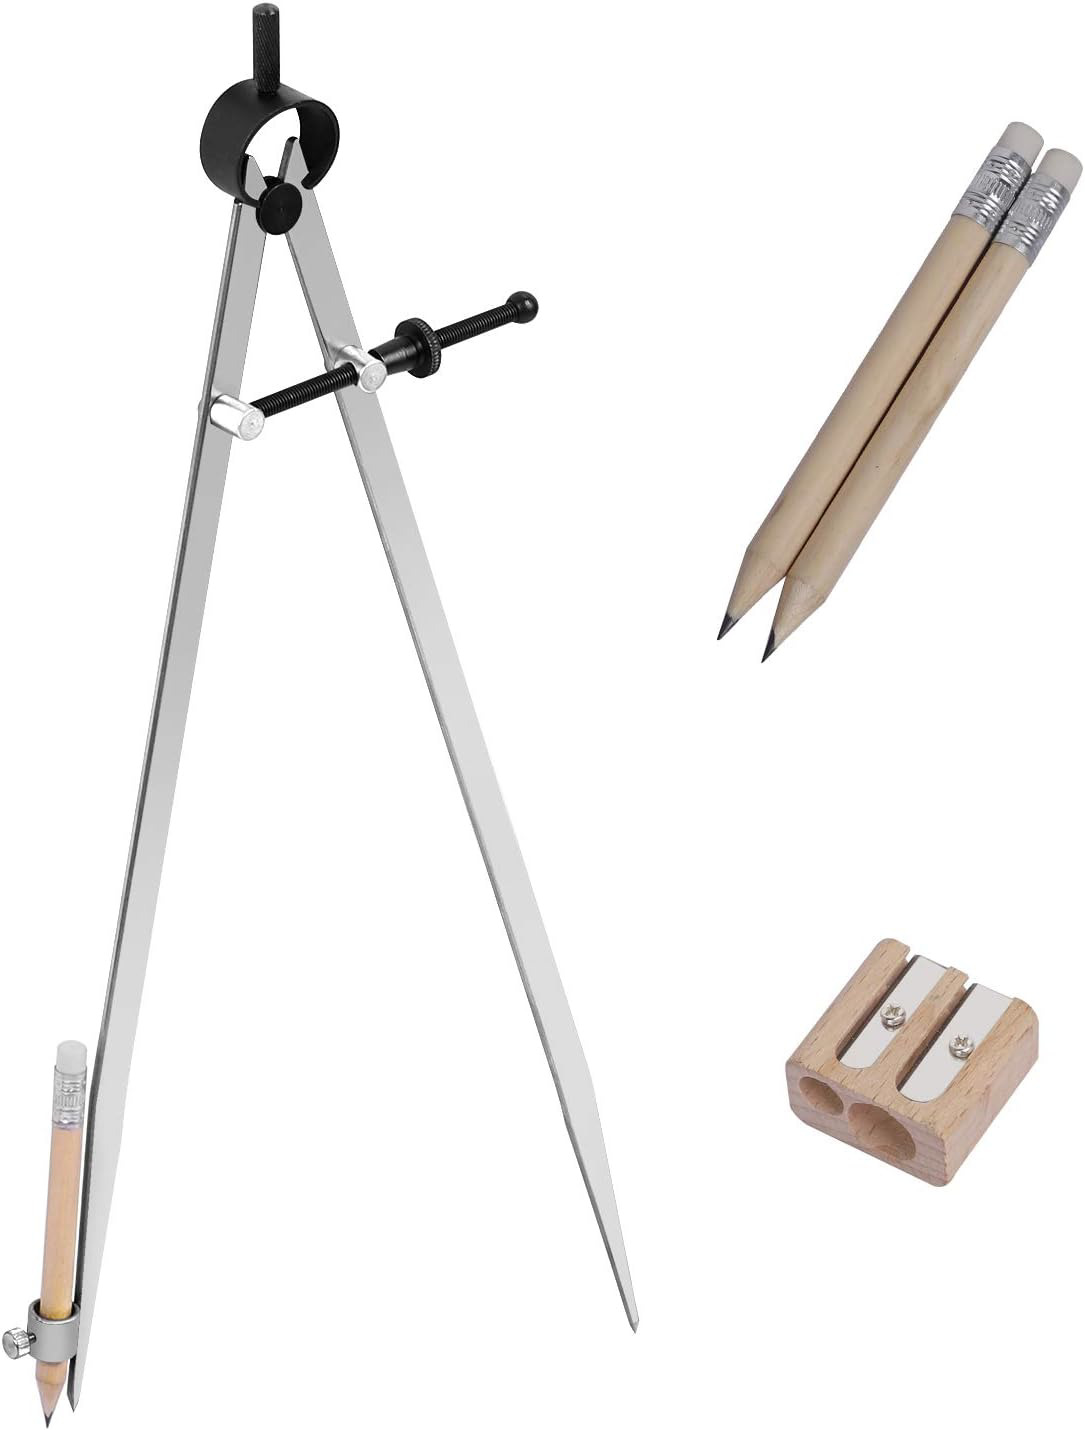 KEILEOHO 12 Inch Professional Precision Woodworking Compass with Pencil Holder 3